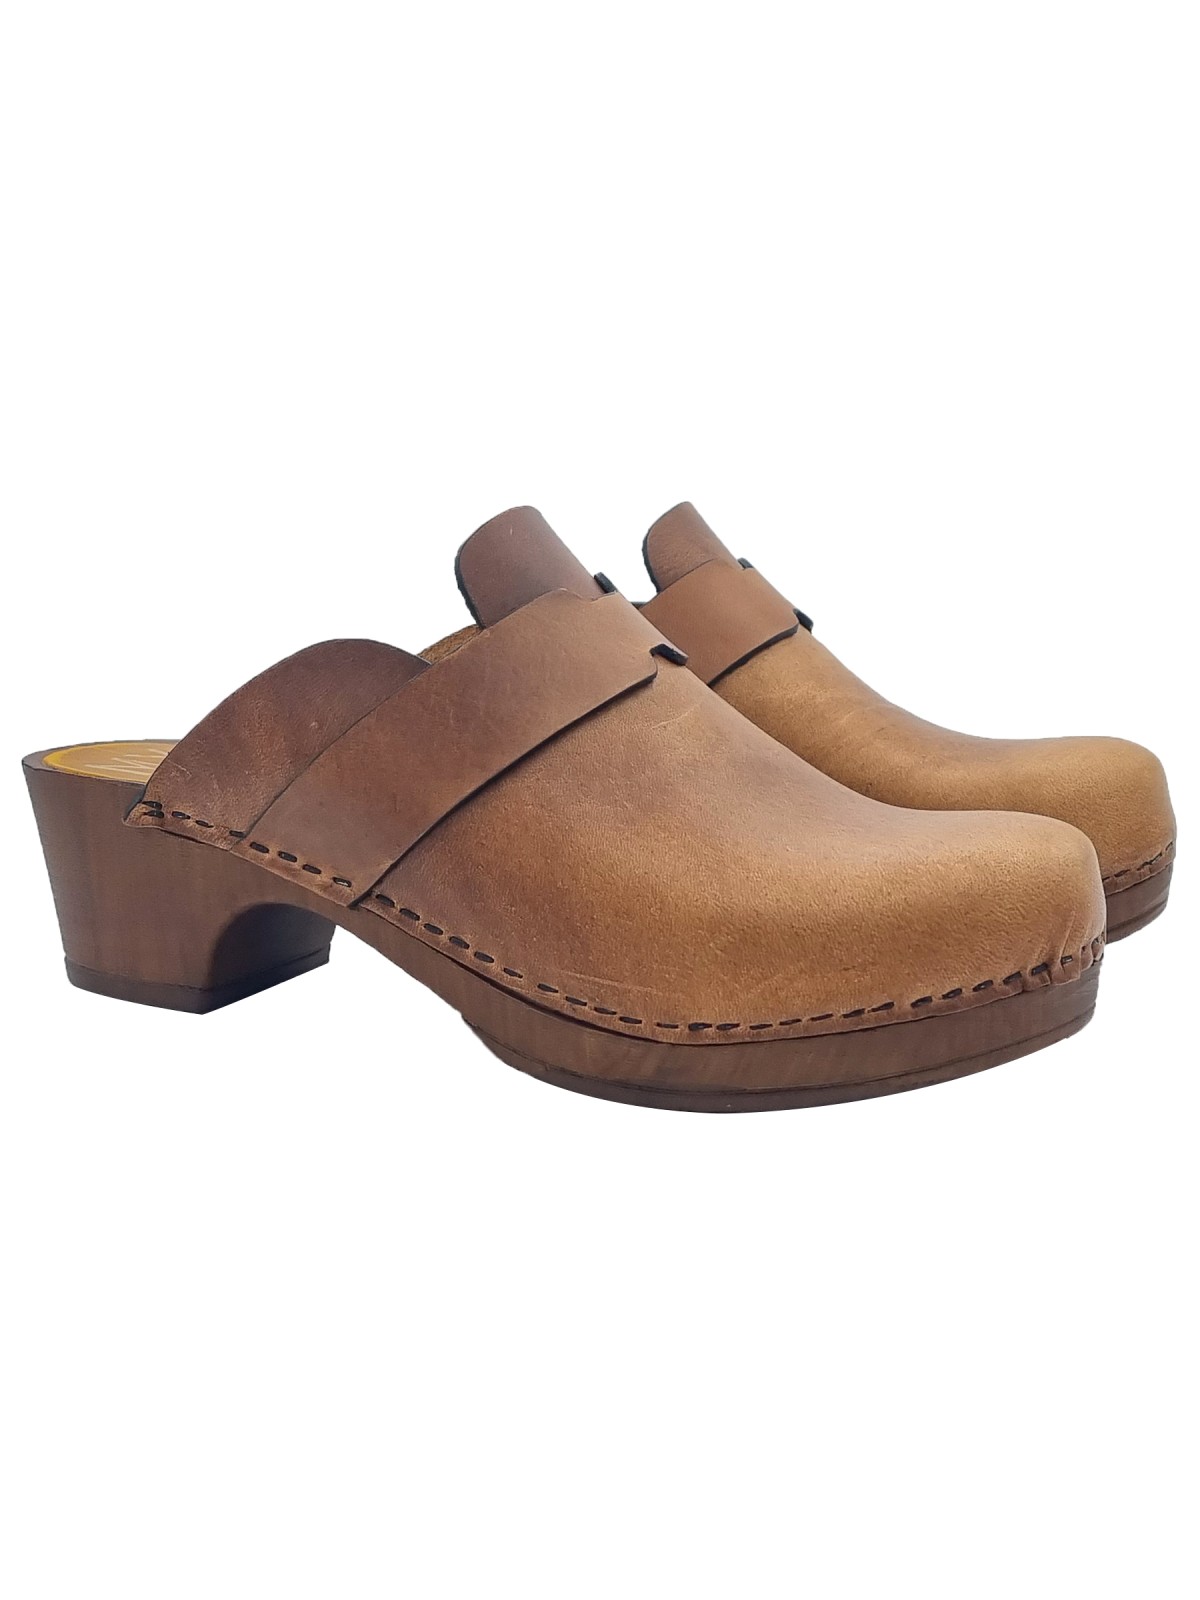 SWEDISH CLOGS IN BROWN LEATHER WITH HEEL 4,5